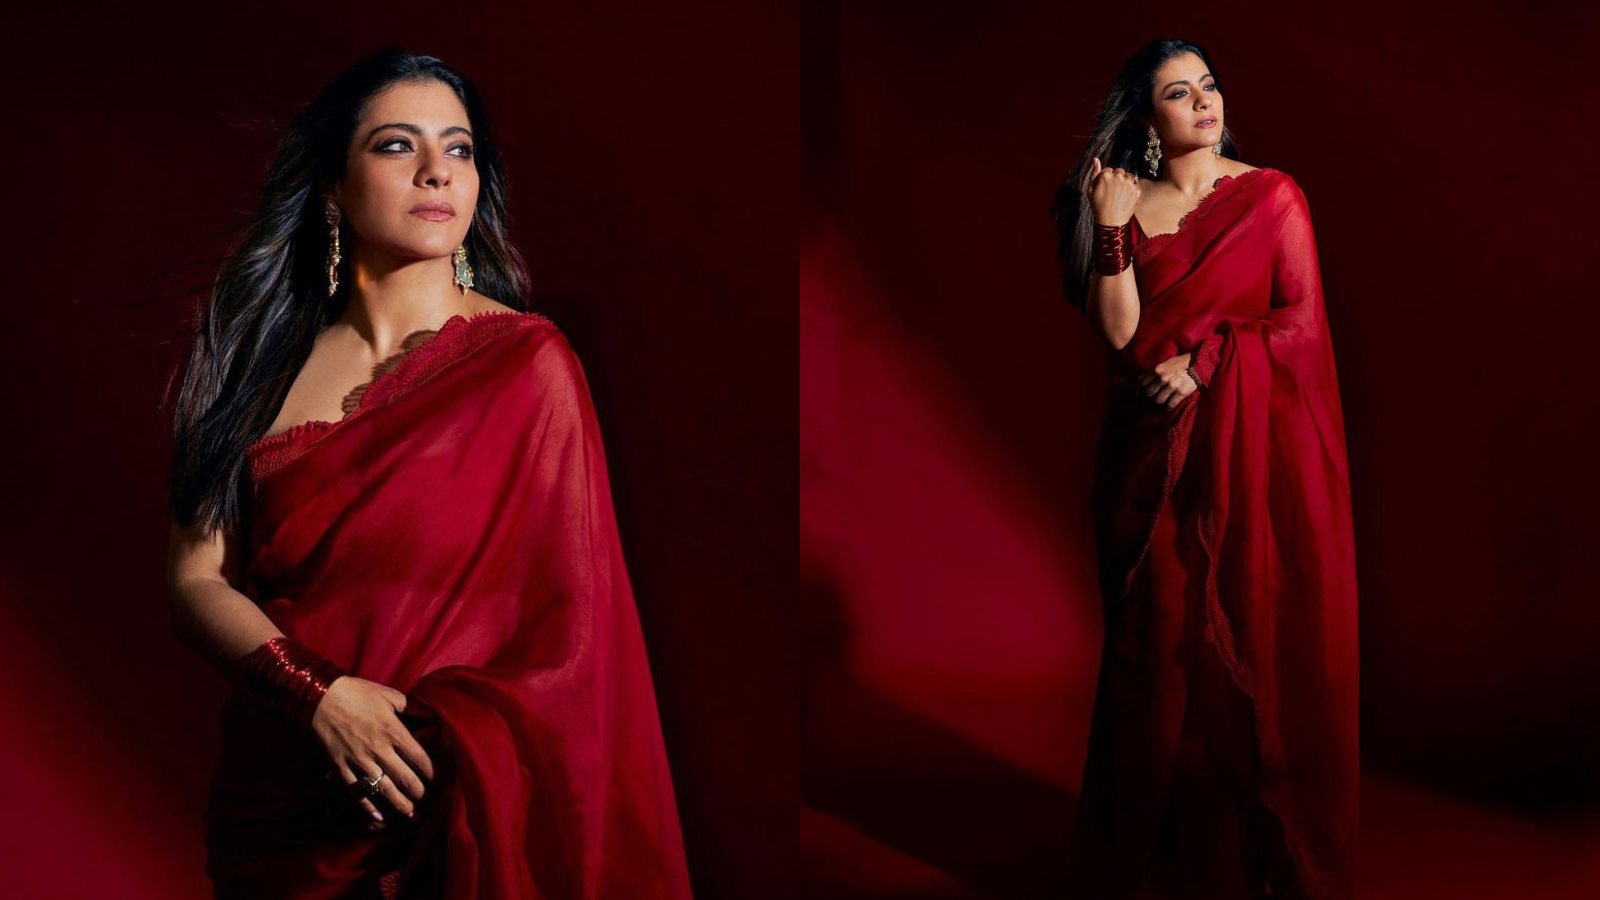 The ever gorgeous @kajol in our rose printed organza sari with